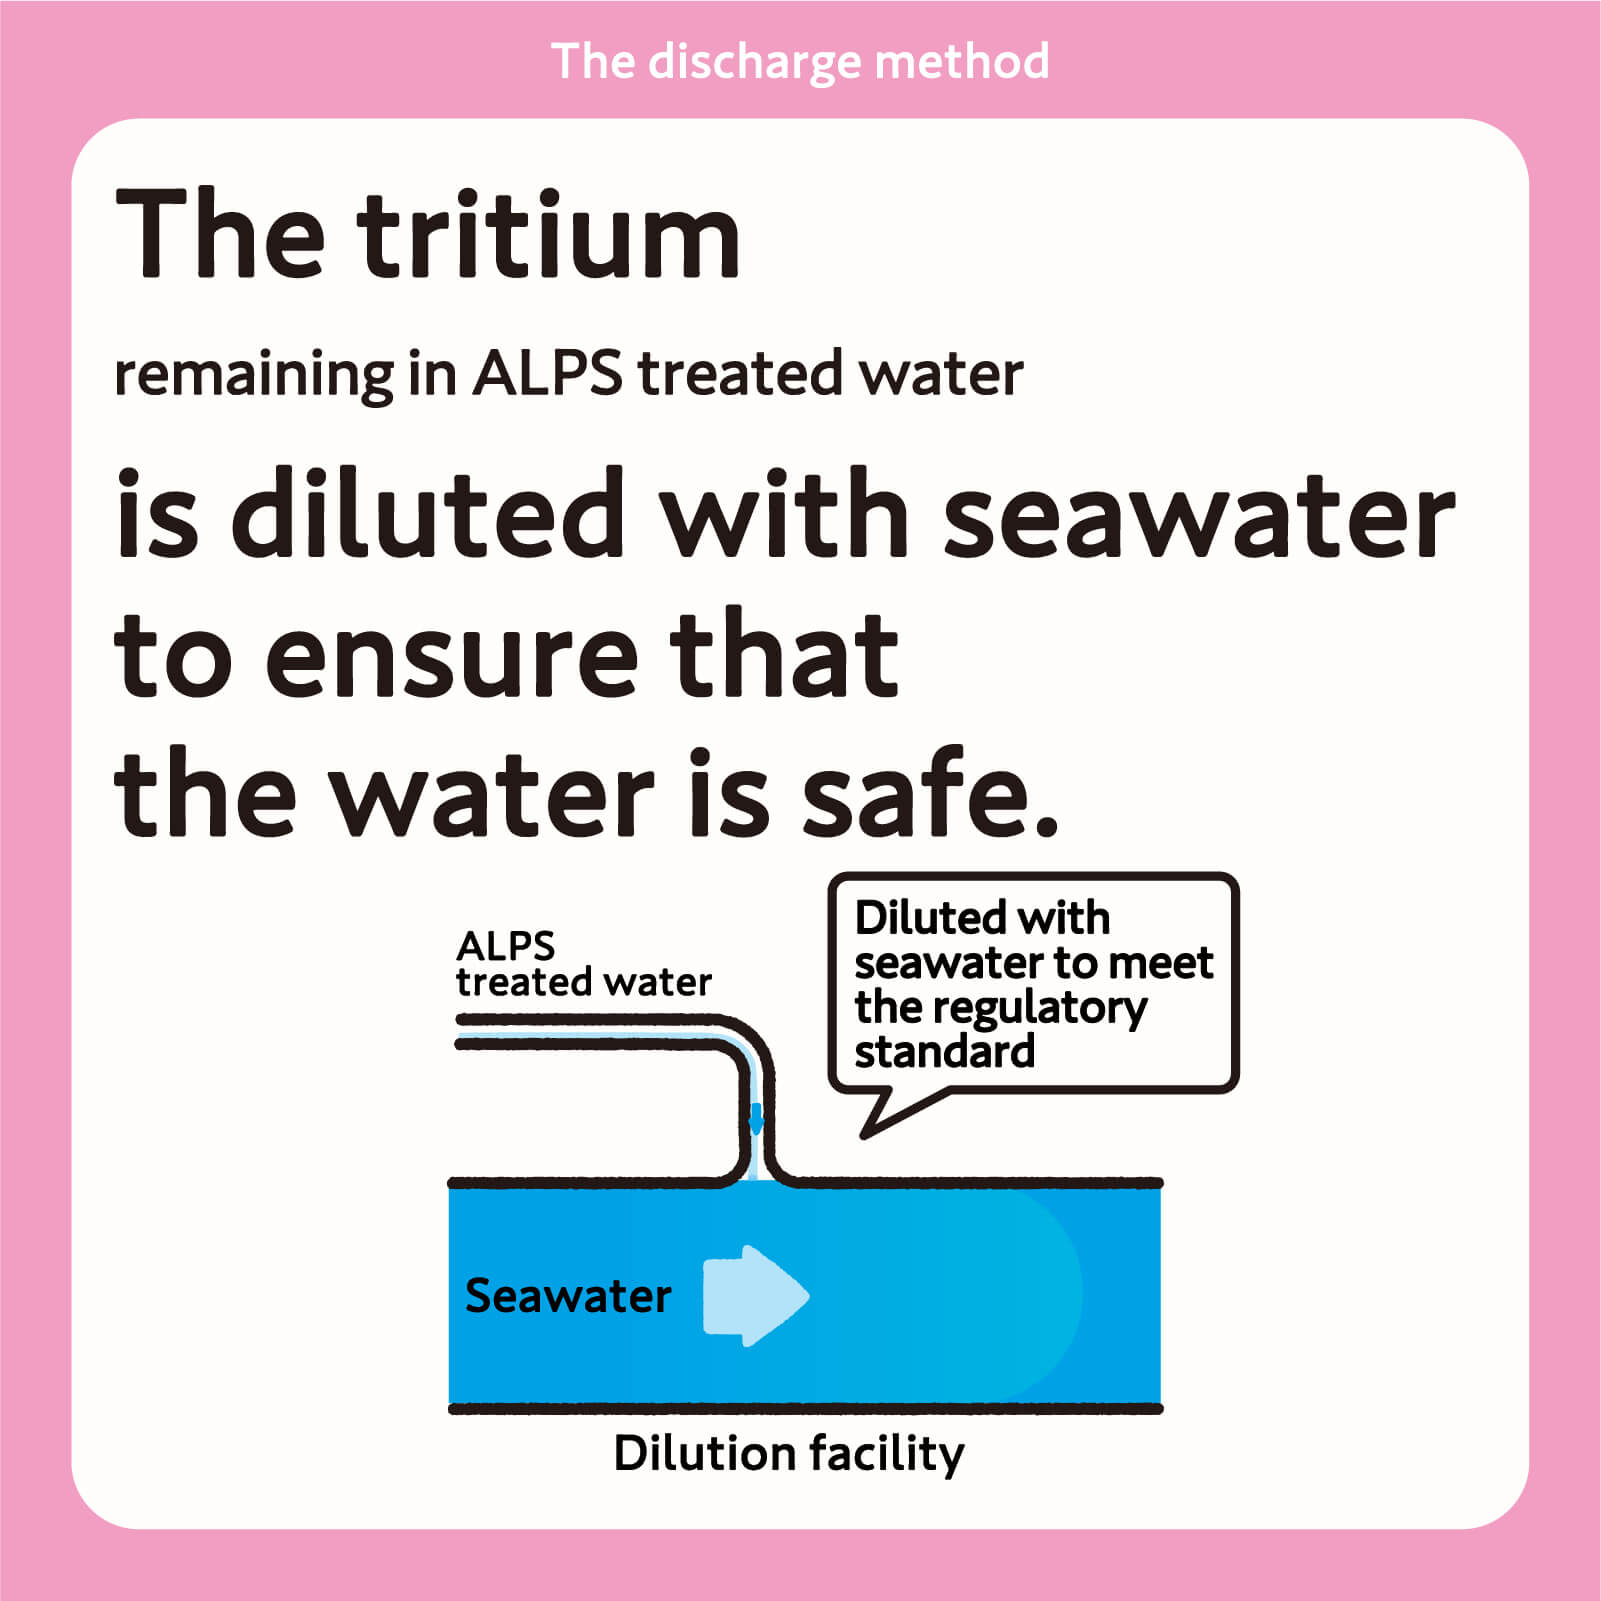 The tritium remaining in ALPS treated water is diluted with seawater to ensure that the water is safe.